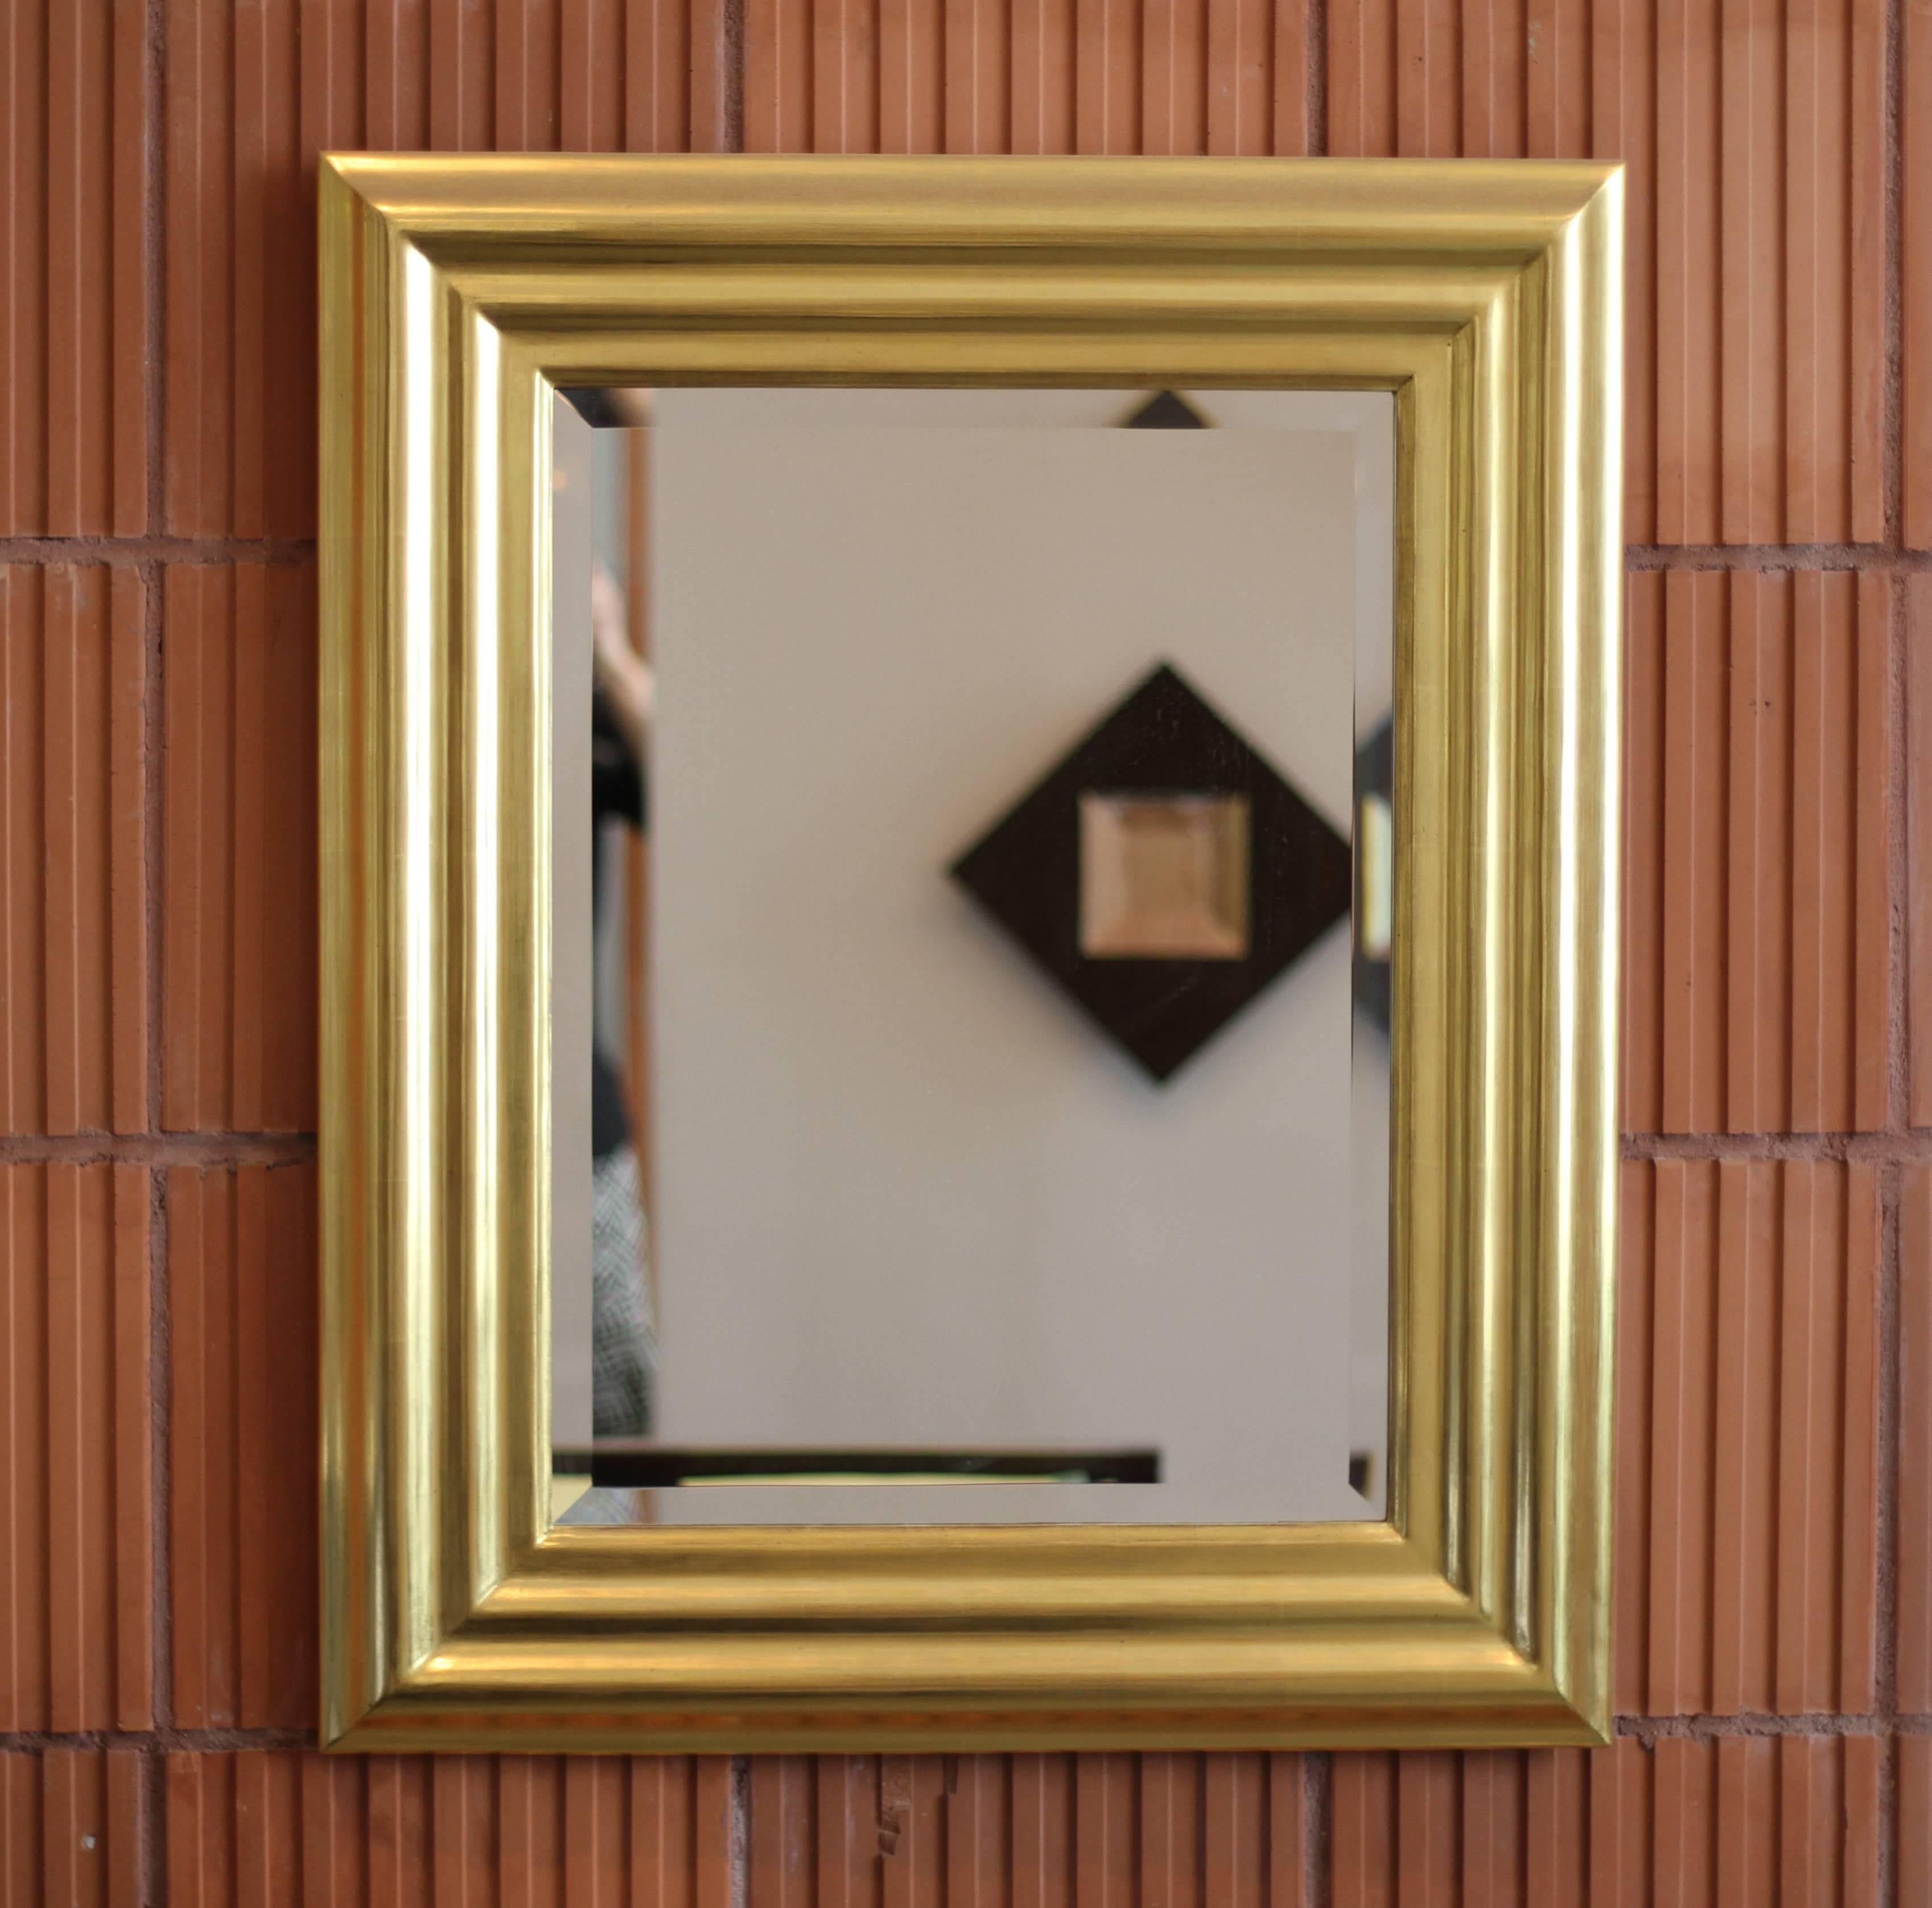 Burnished Degas No. 6 Ripple Wall Mirror, Gilded in 23kt Yellow Gold, by Bark Frameworks For Sale